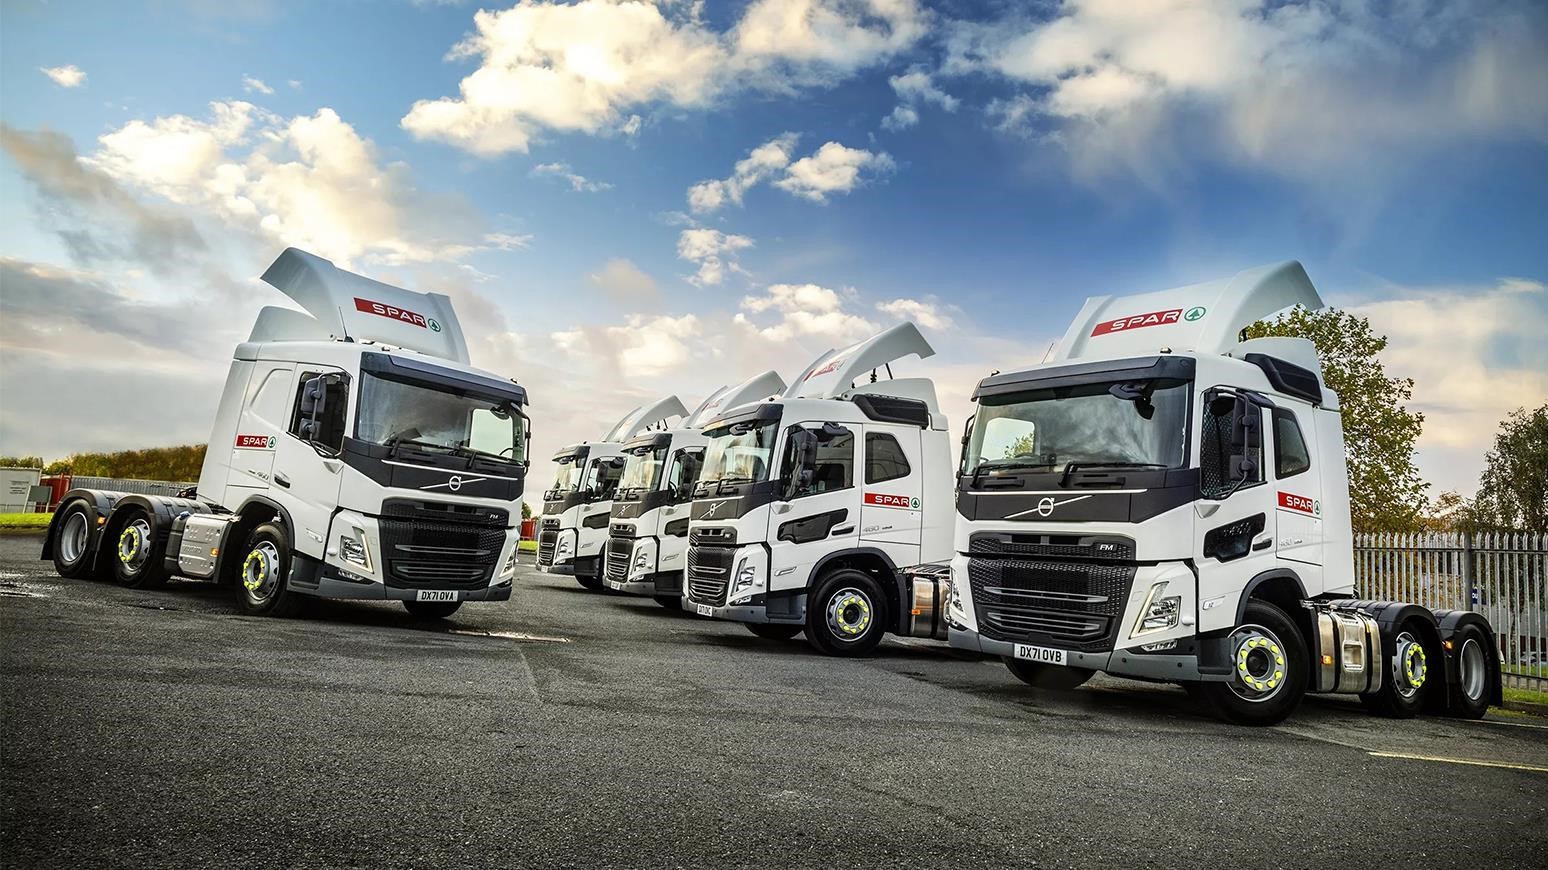 A.F. Blakemore & Son’s 10 New Volvo FMs Improve Safety & Visibility In Food Distribution Fleet